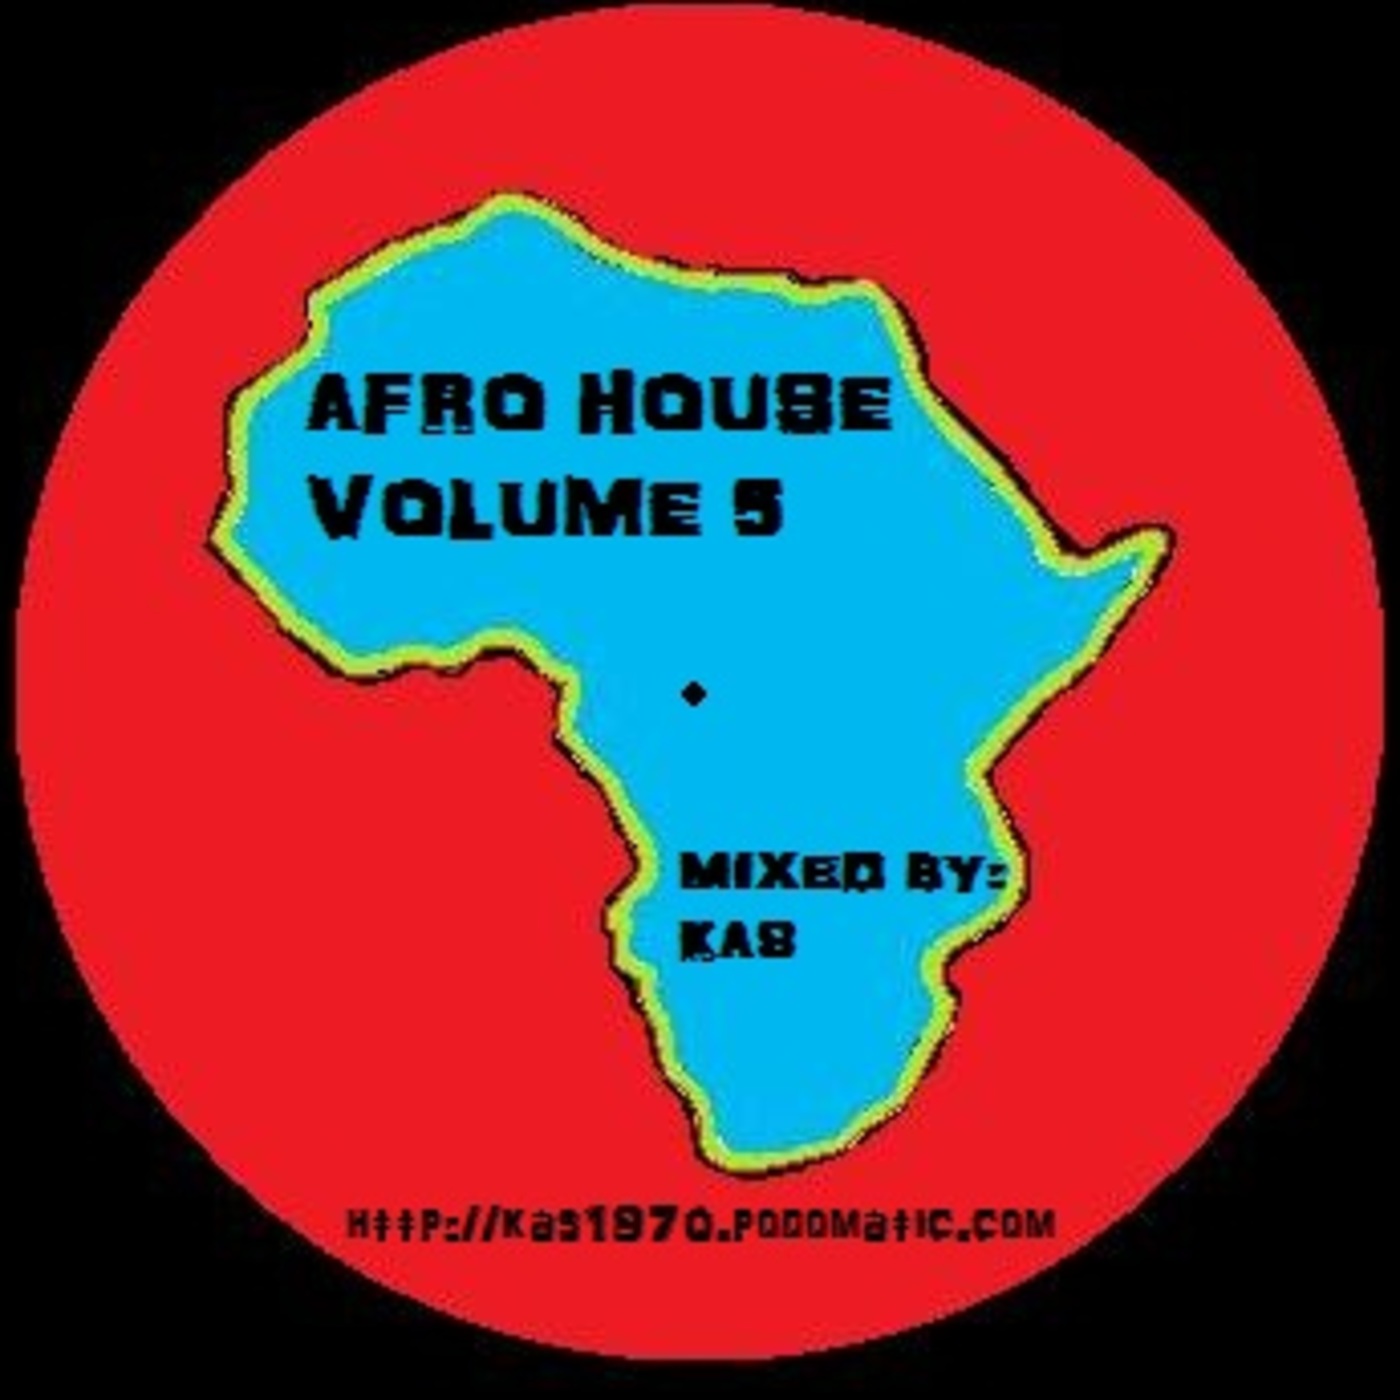 Afro House Volume 5